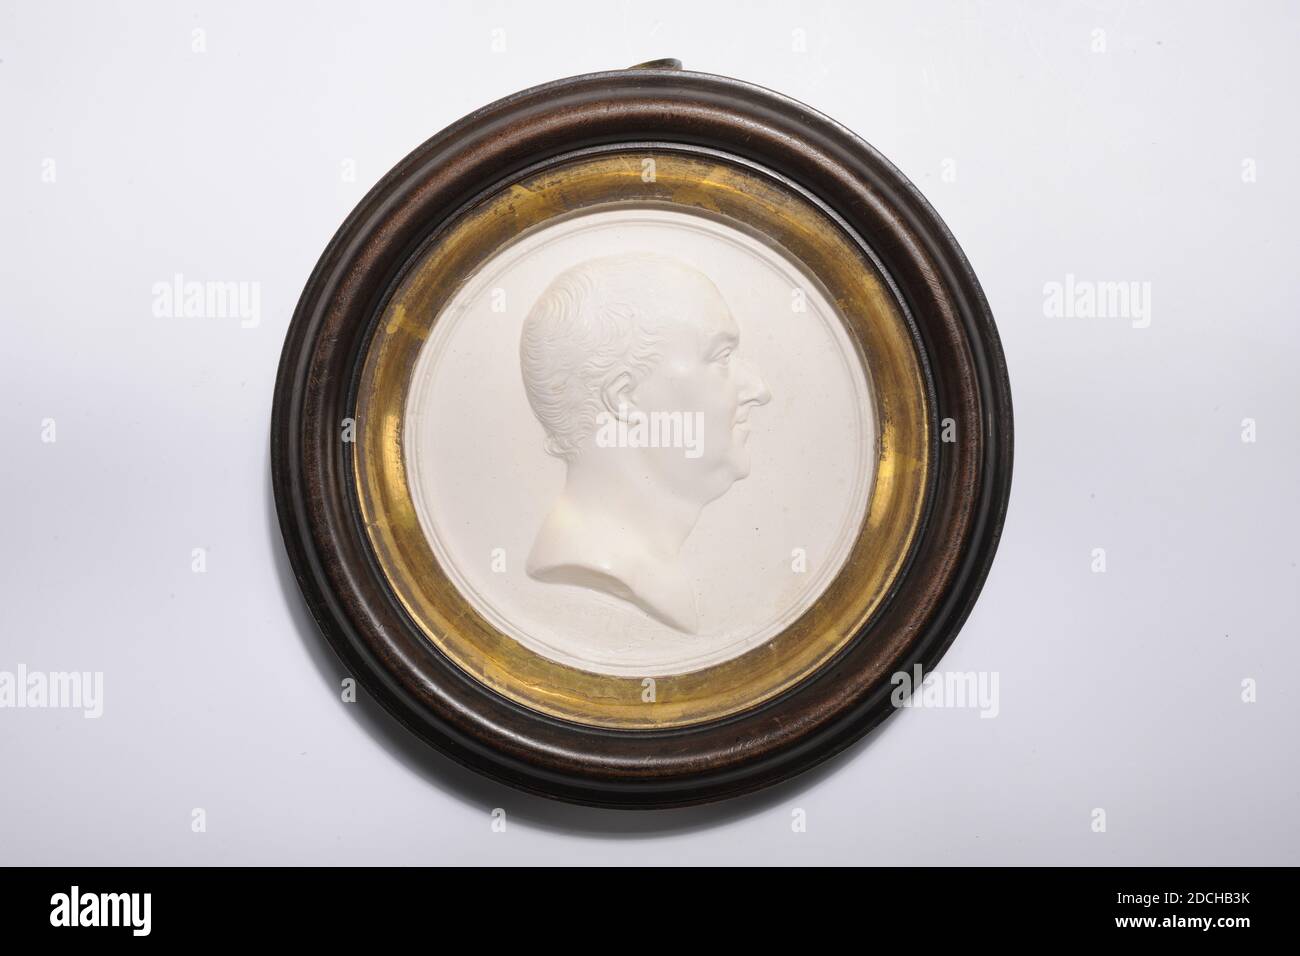 Johann Heinrich Schepp, 18th century, relief, under the man's portrait: Schepp fec, glass, wood, plaster, General: 13.5 x 2.3cm 135 x 23mm, man's portrait, Round medallion with a plaster cast with the bust of Peter in relief Camper. He is used to the far right and wears short hair. The signature is under the man's portrait. The cast is in a wooden frame, with a gilded inner edge, behind glass. A small hanging eye hangs from the medallion, 1931 Stock Photo